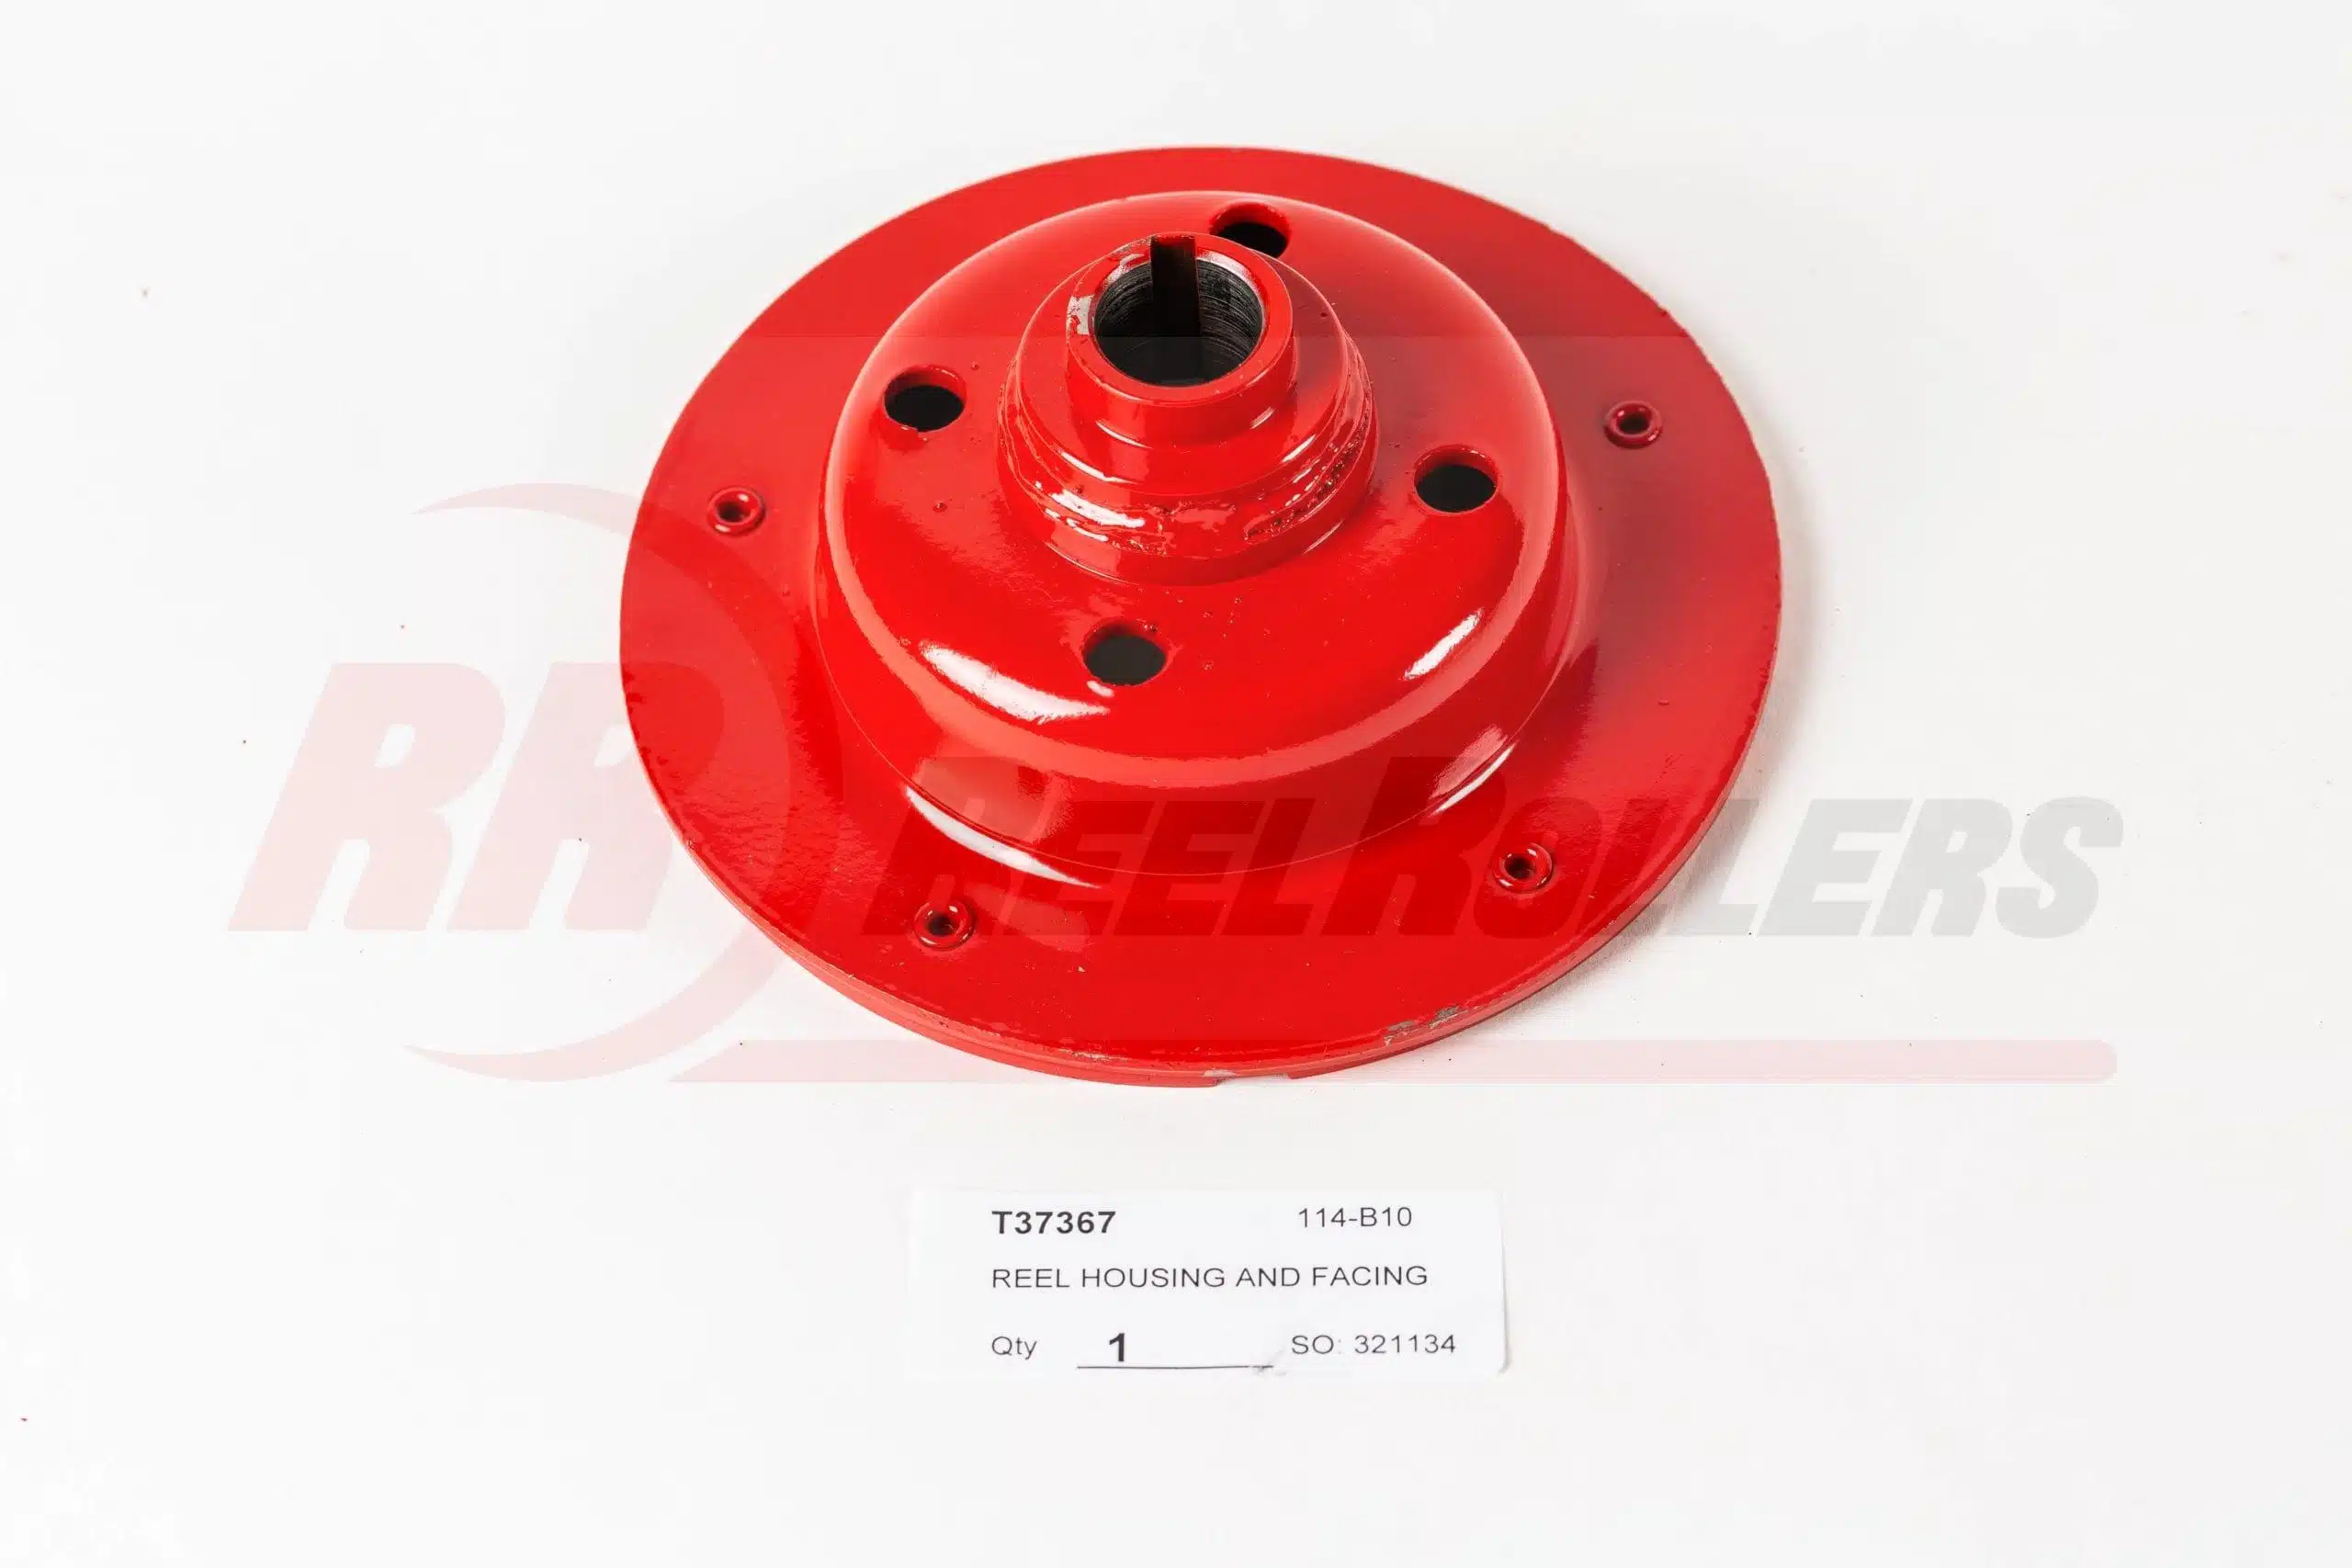 Tru Cut Clutch Housing with Facing RH for C25 and C27 – T37367